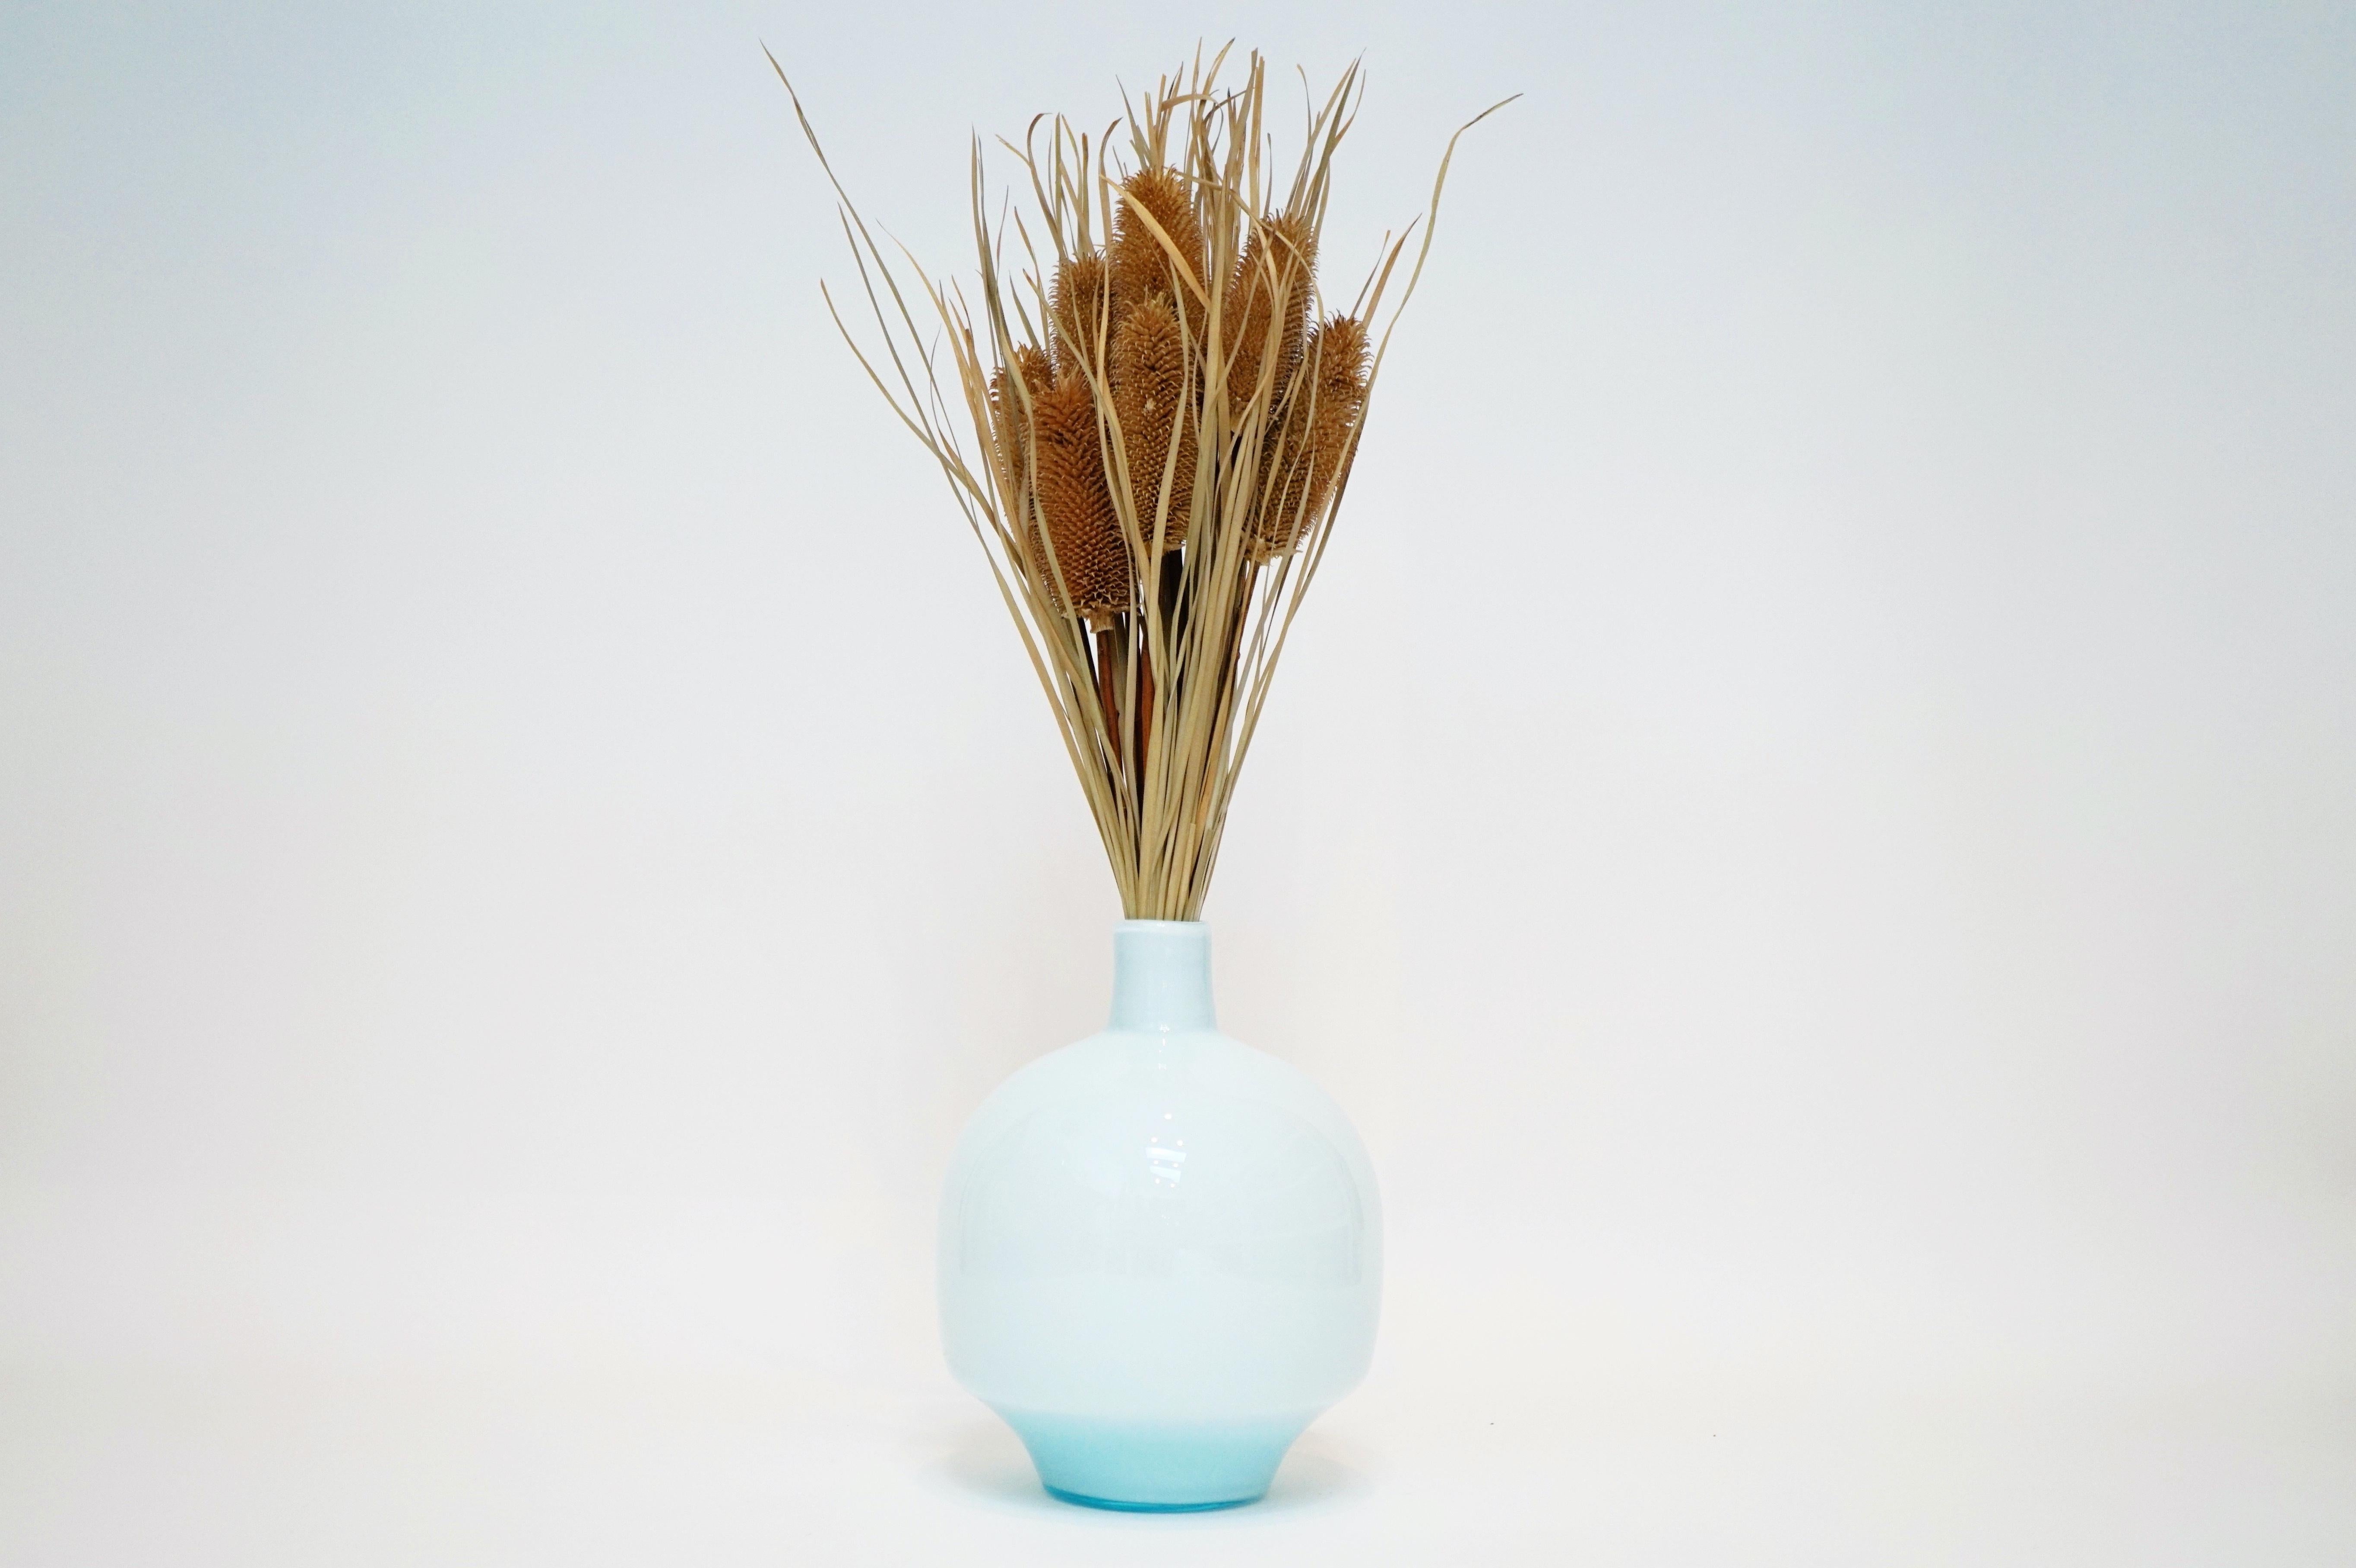 This beautiful powder blue Murano glass minimalist vase is a wonderful accent to any room! Perfect for showcasing dried flower arrangements, excellent in a powder room or entry.

Details:
- Powder blue Murano glass
- 24